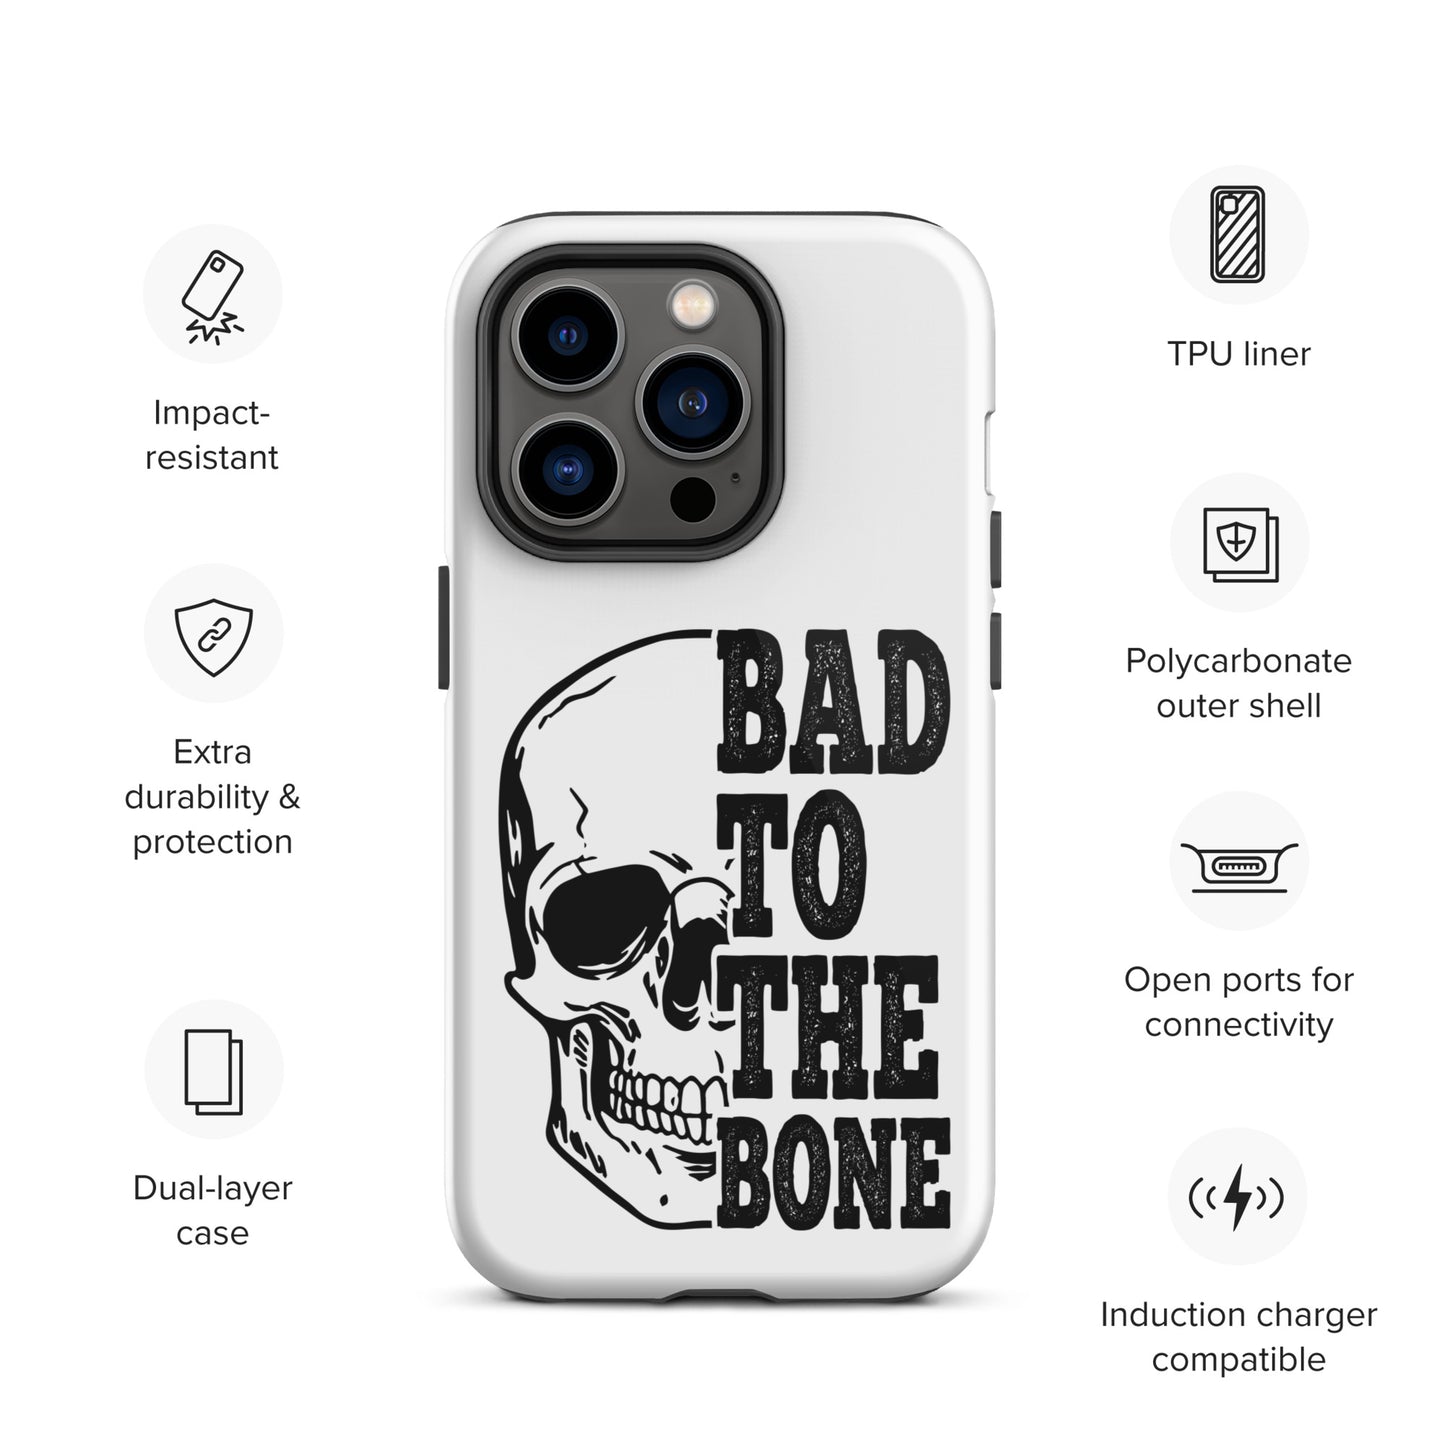 Bad To The Bone Tough iPhone case